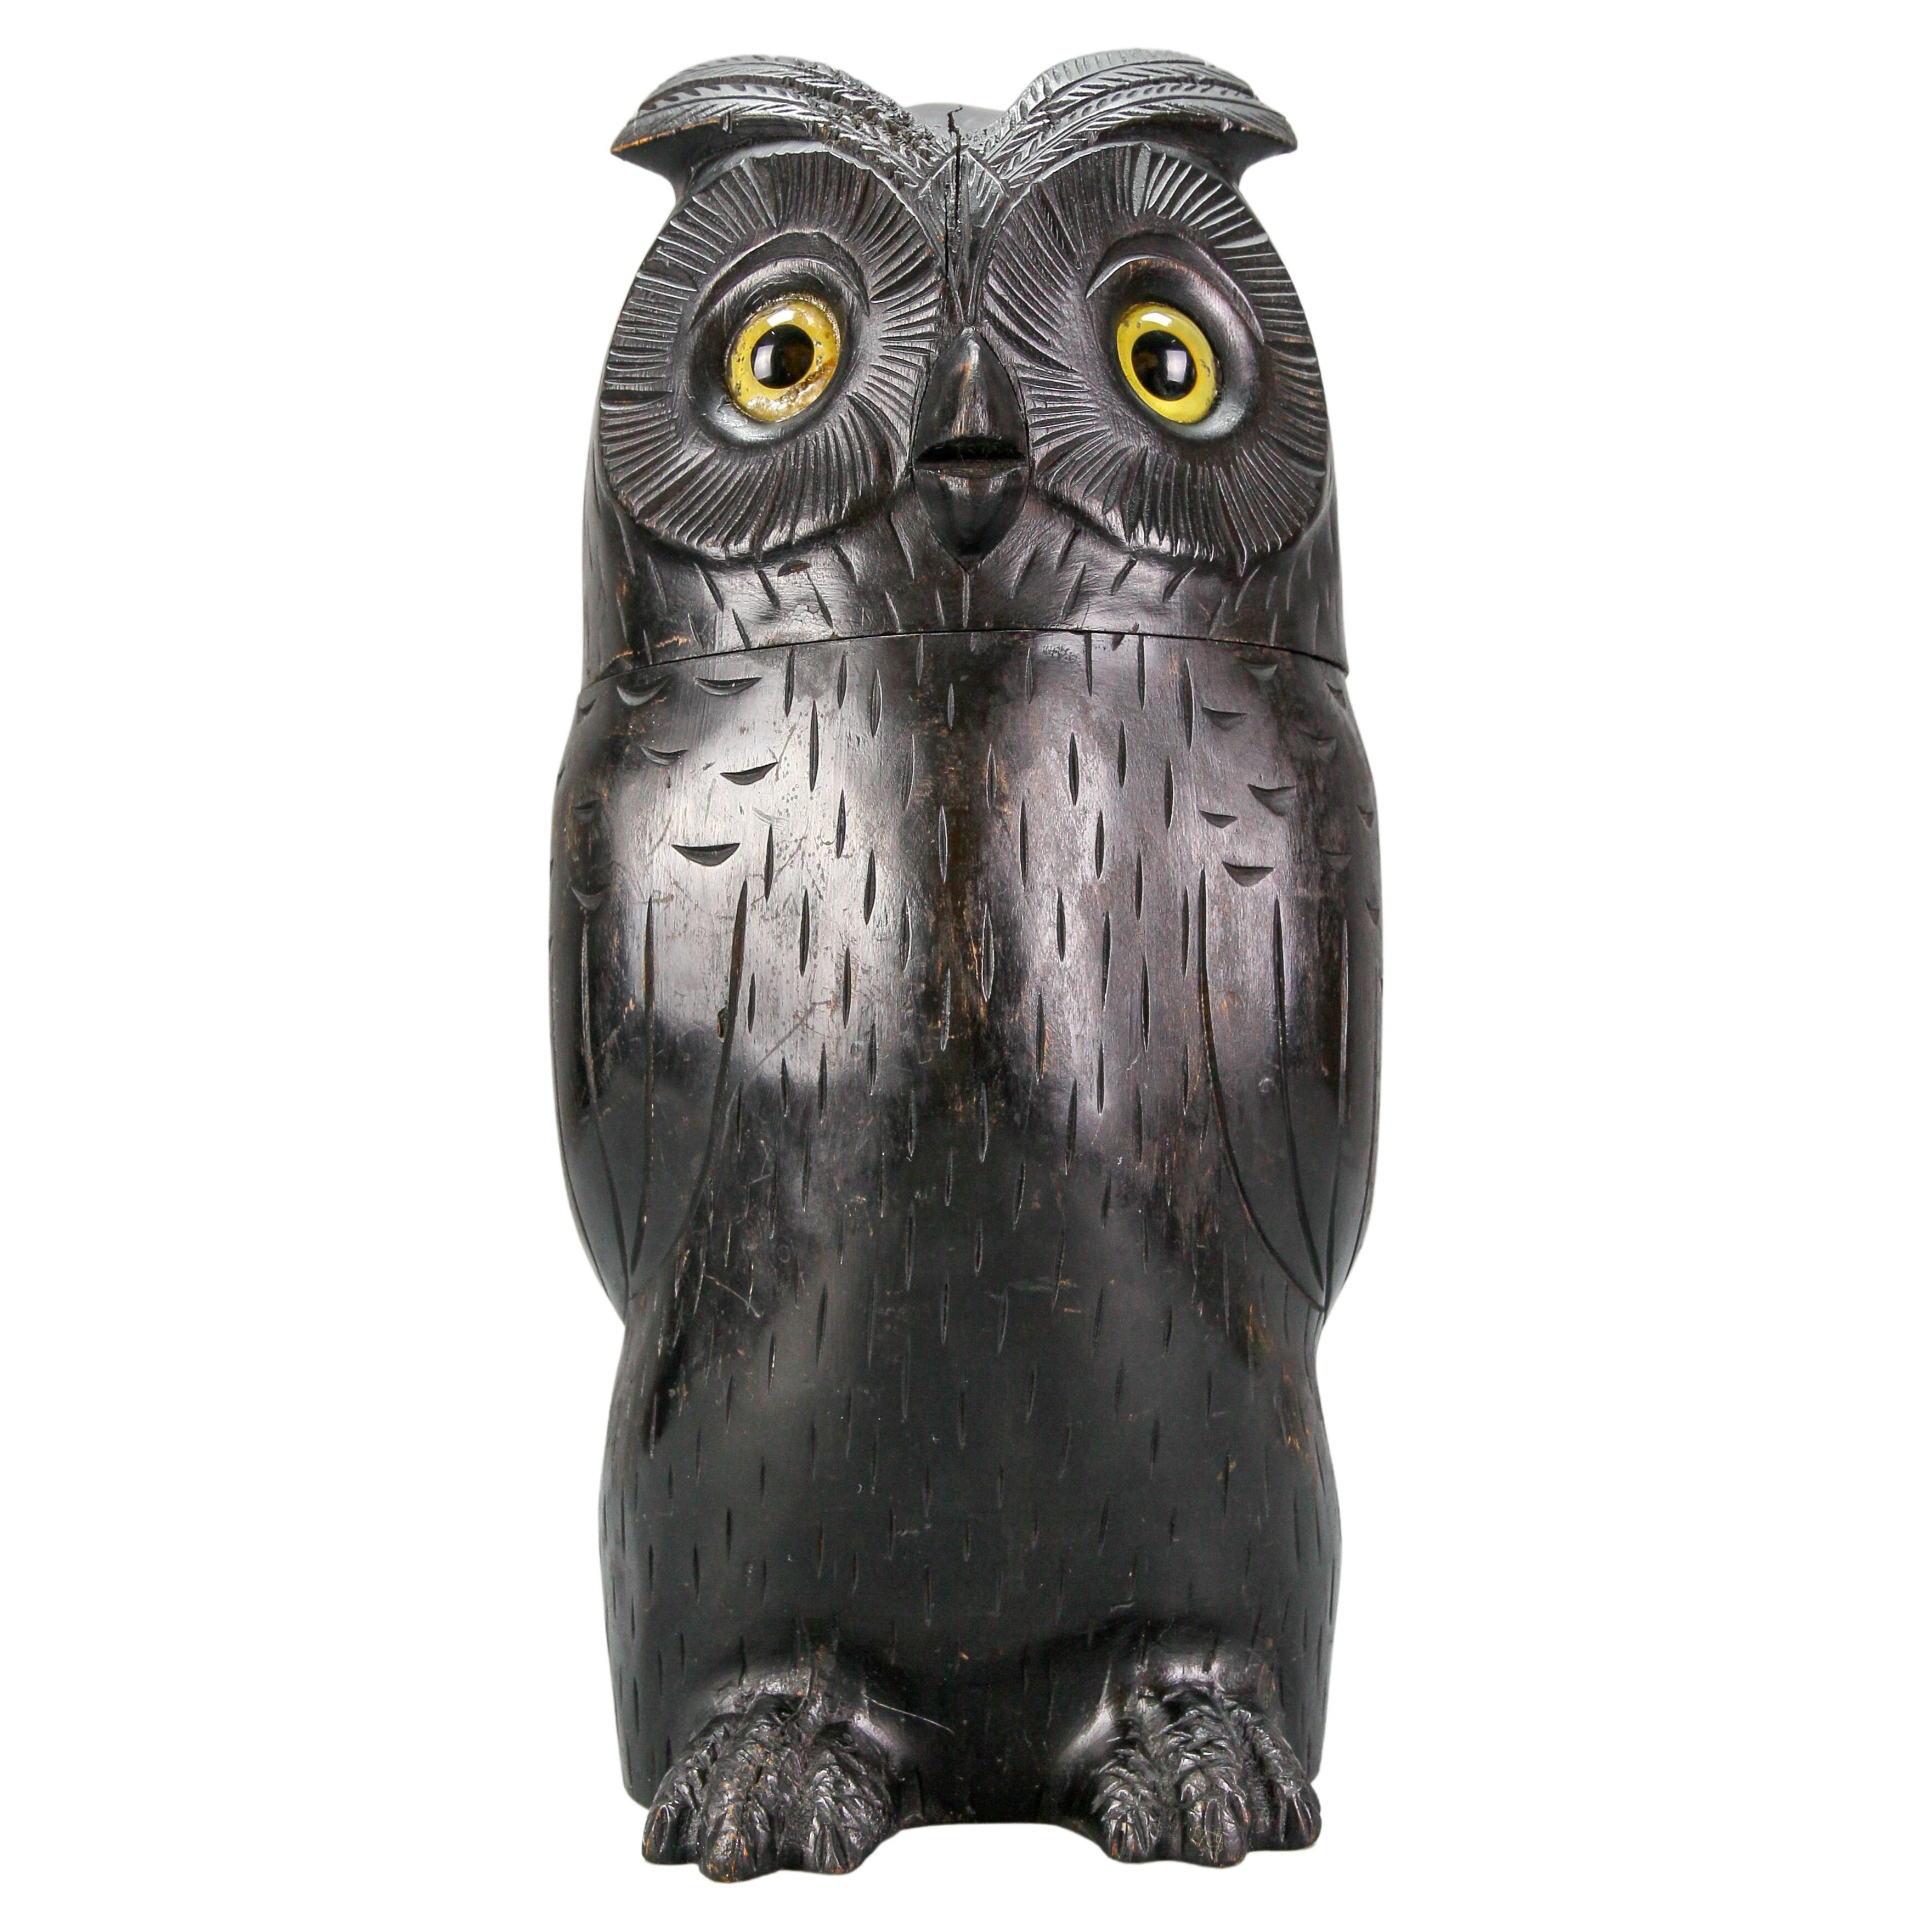 Antique Black Forest Style Wooden Carved Trinket Box or Bucket Owl, circa 1920